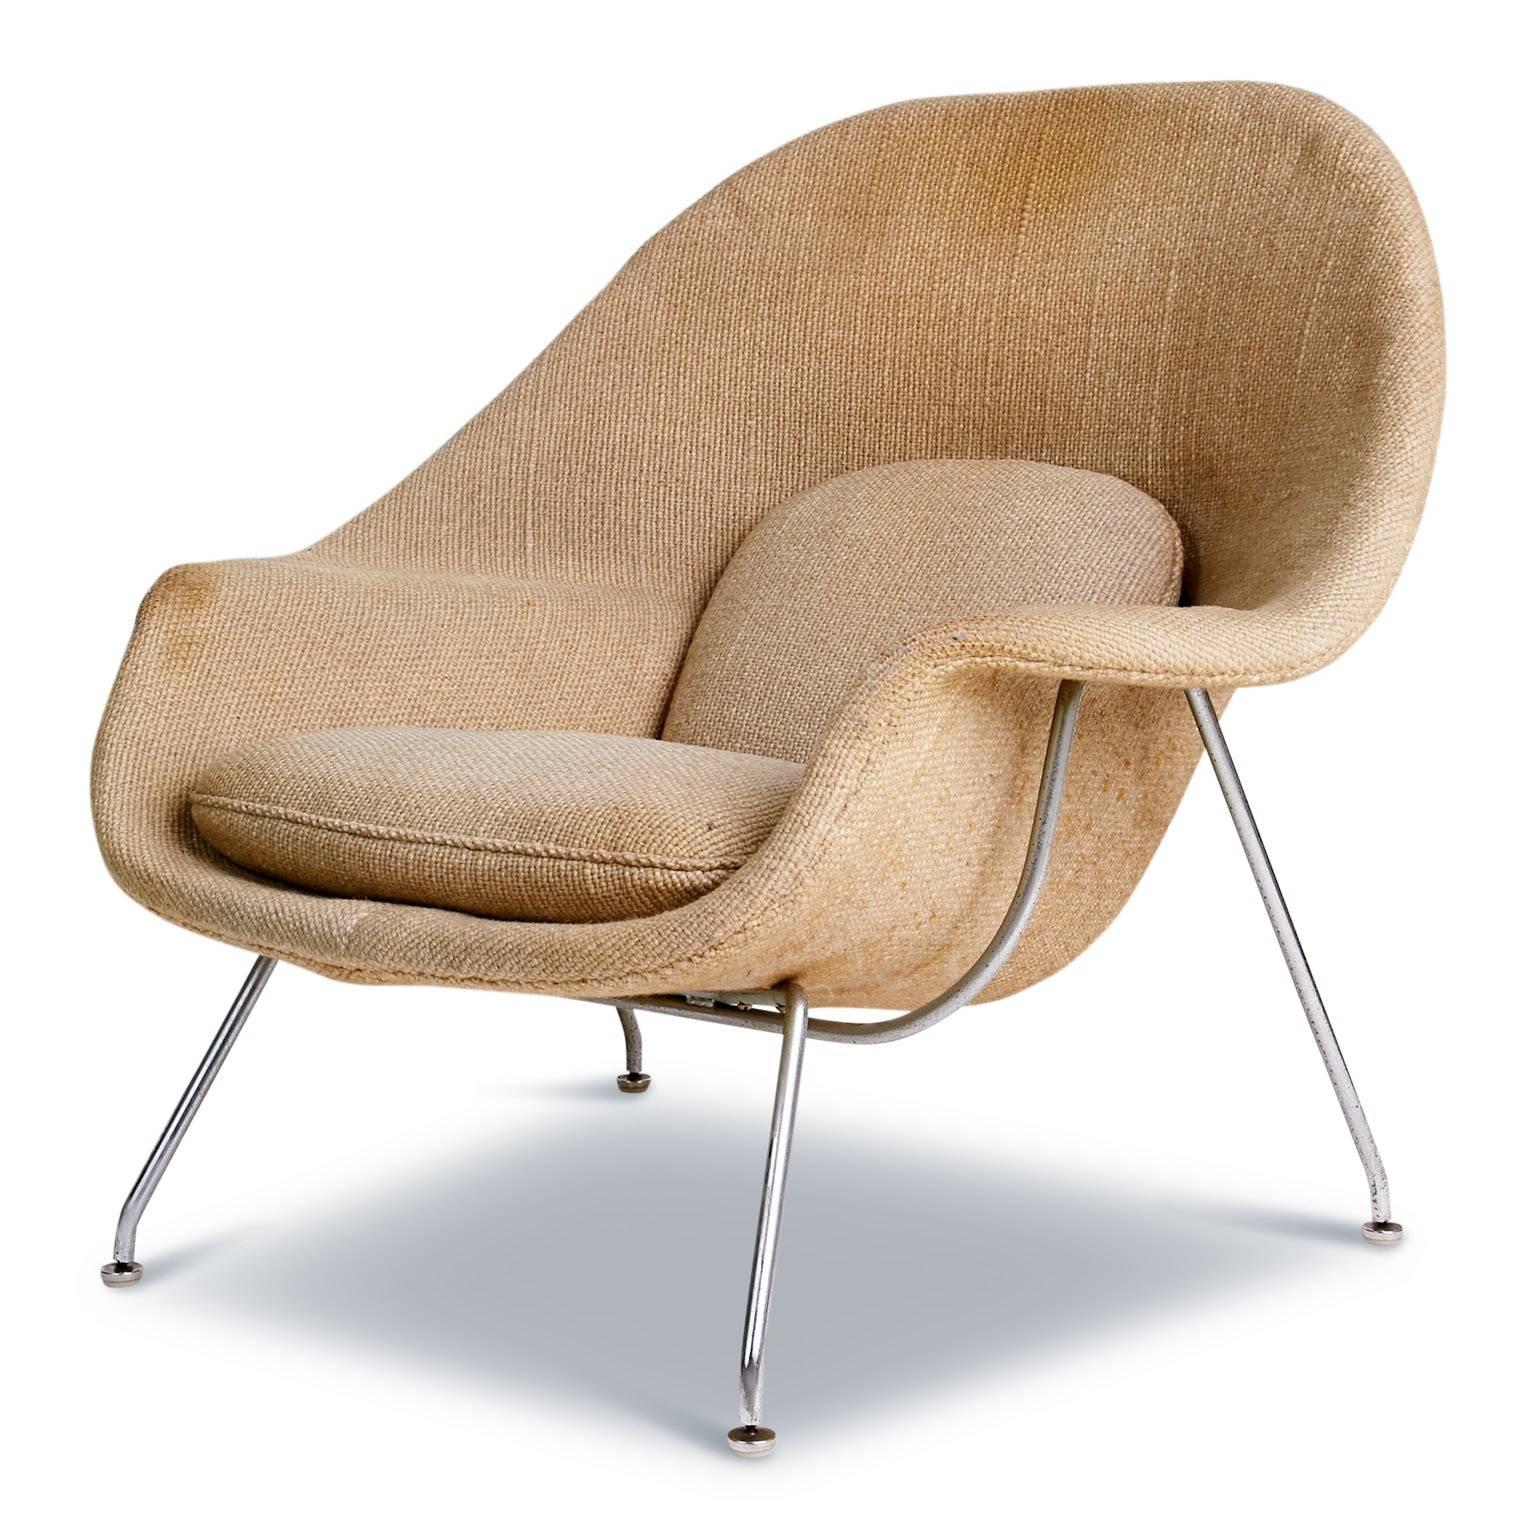 This rare first generation Model 70  Chair, more commonly known as the Womb Chair, by Eero Saarinen for Knoll Associates is signed by the affixed label with the early 36-30 Steinway St Long Island City 1, N.Y. address (see pics) which predates the